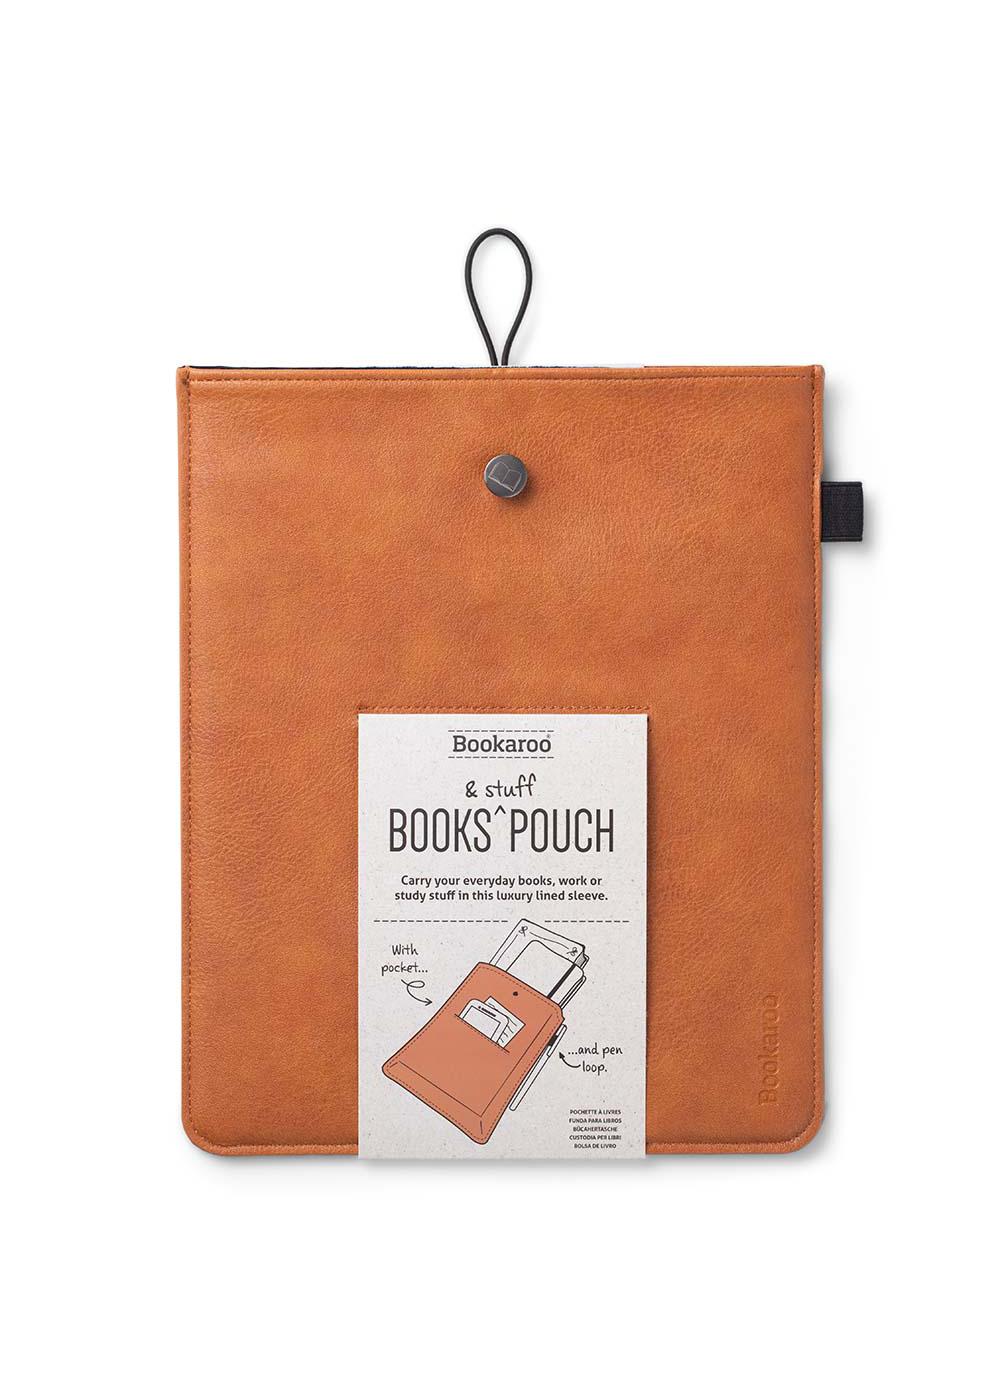 Bookaroo Books & Stuff Pouch – Brown; image 5 of 5